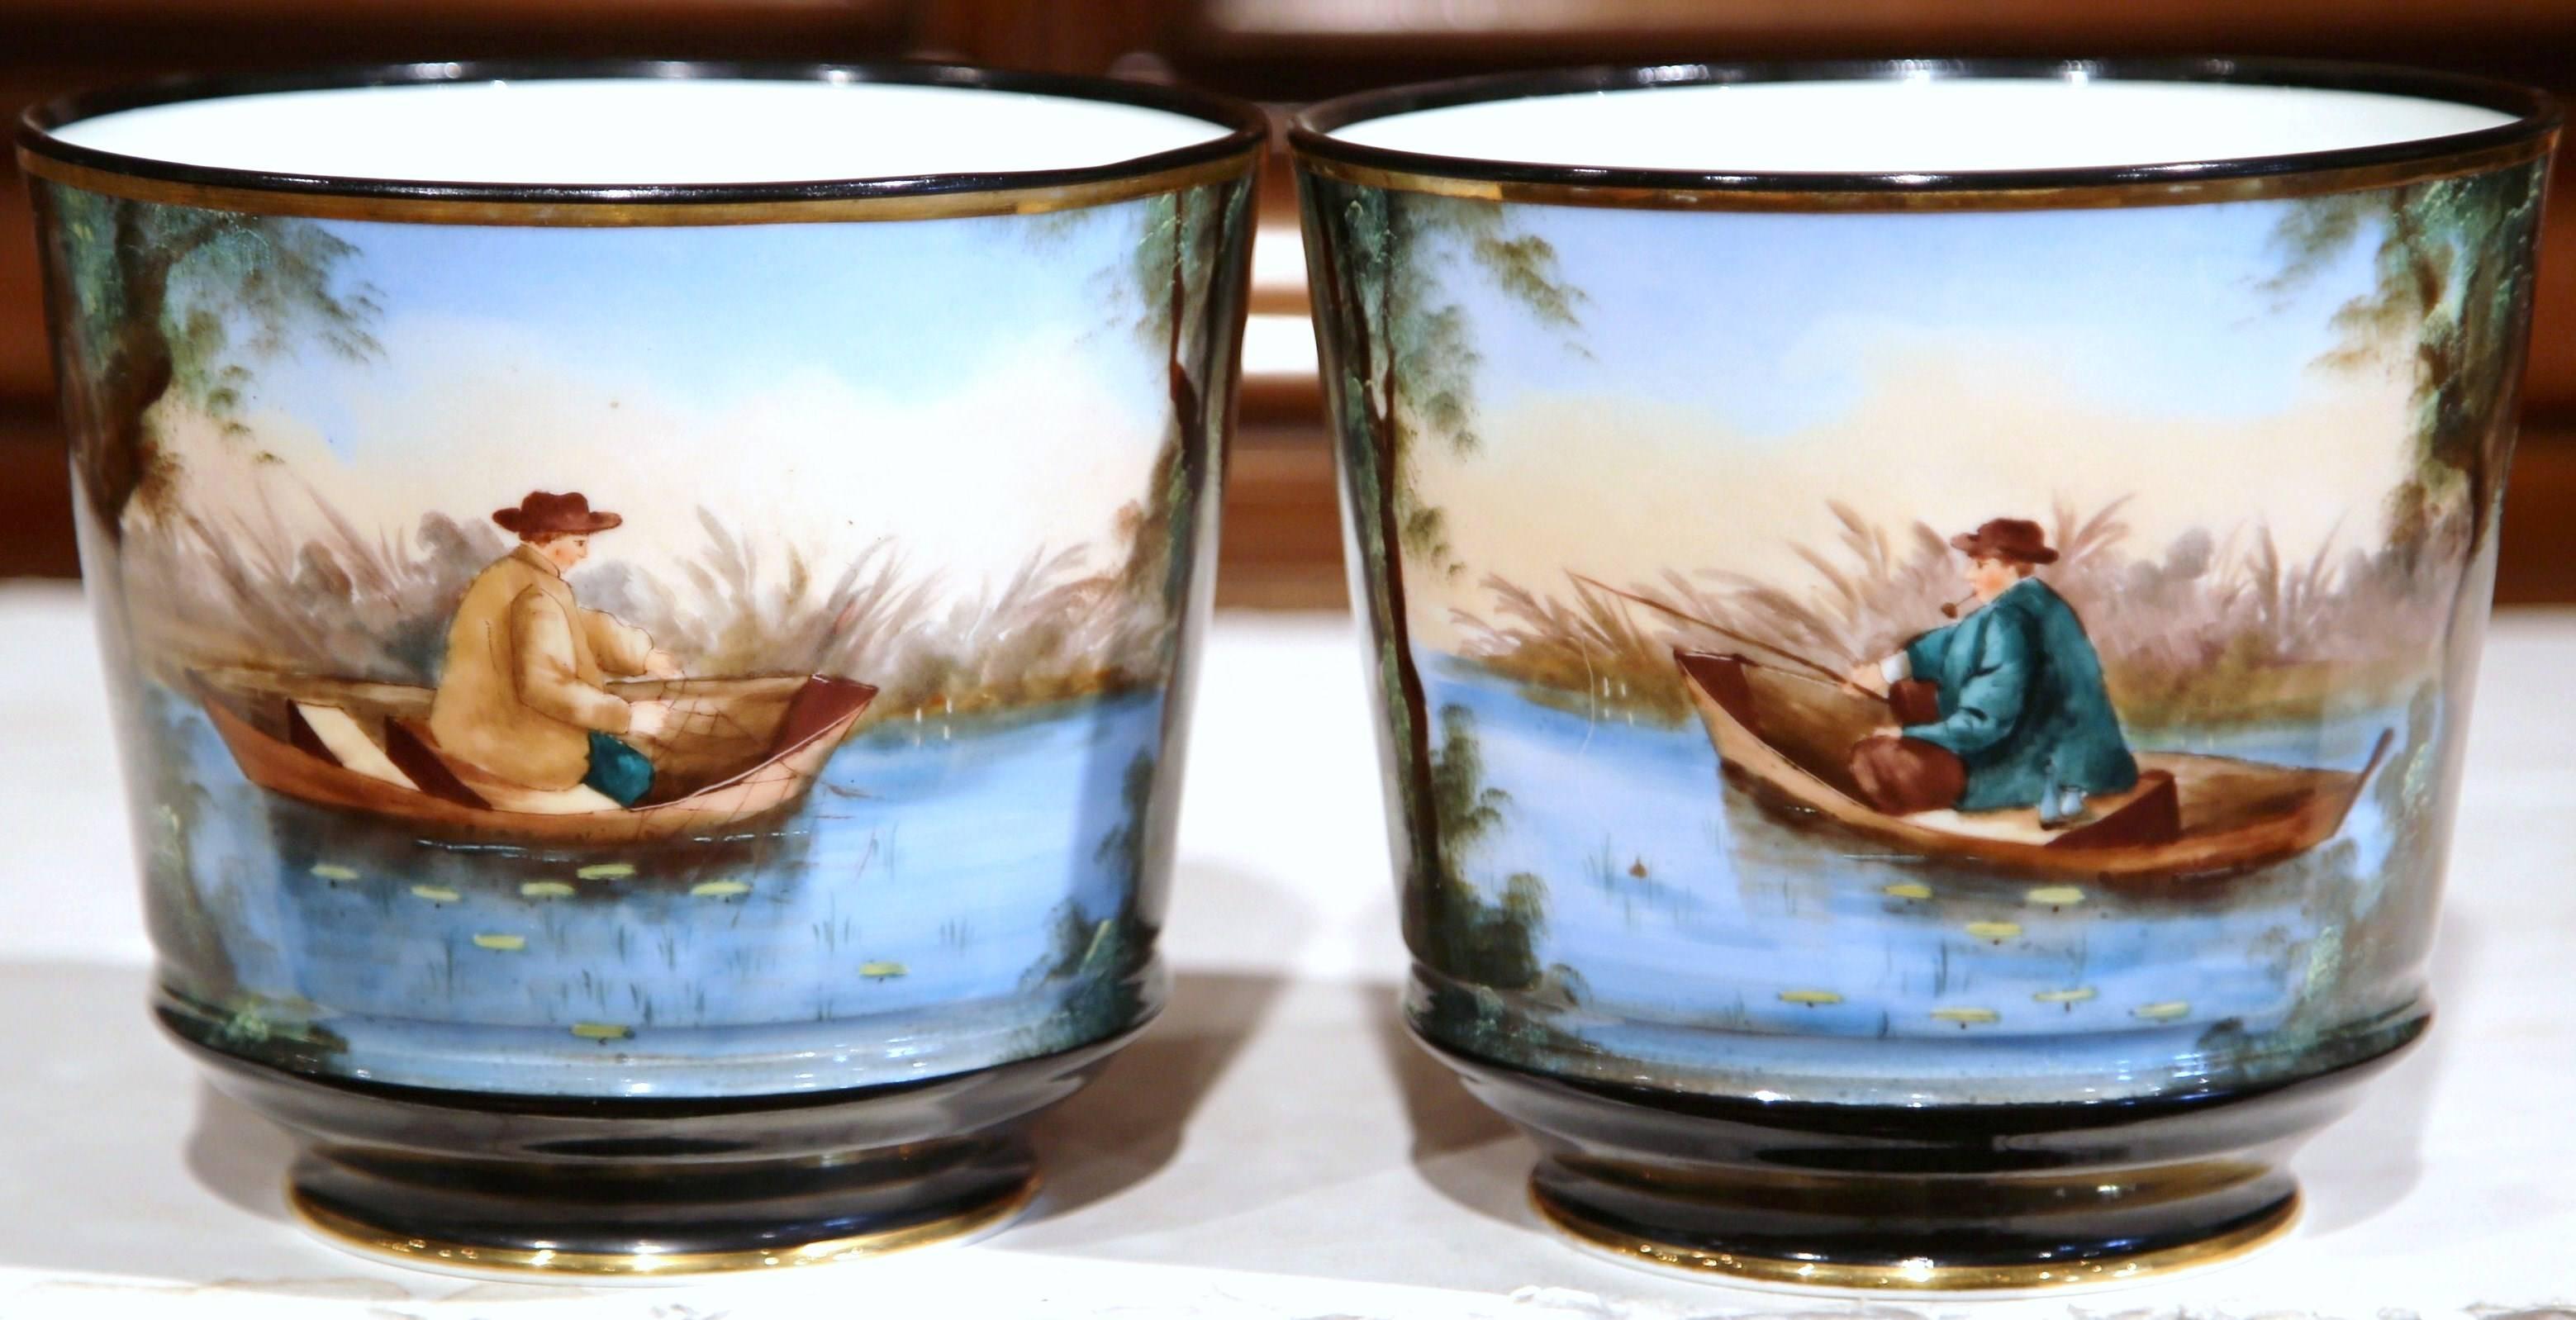 Bring a little color into your home with this pair of elegant, antique porcelain planters. Crafted in France circa 1870, the ceramic pots each show a handpainted fisherman in his boat. Each Limoges style porcelain cache pot has a gold rim on top and